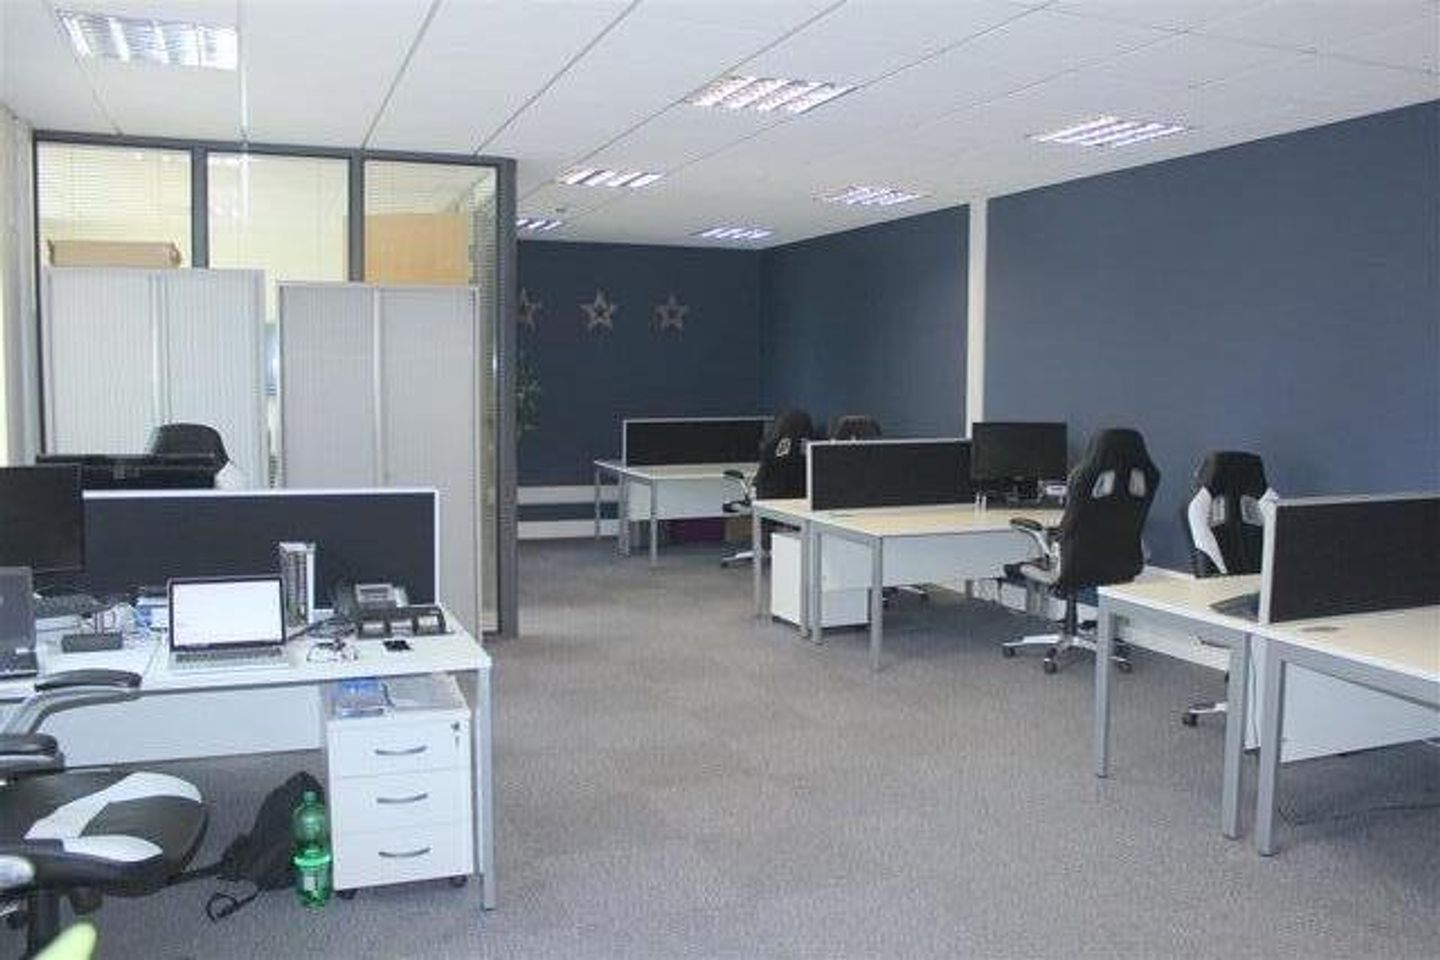 Suite 5, Block 6, Broomhall Business Park, Rathnew, Wicklow Town, Co. Wicklow